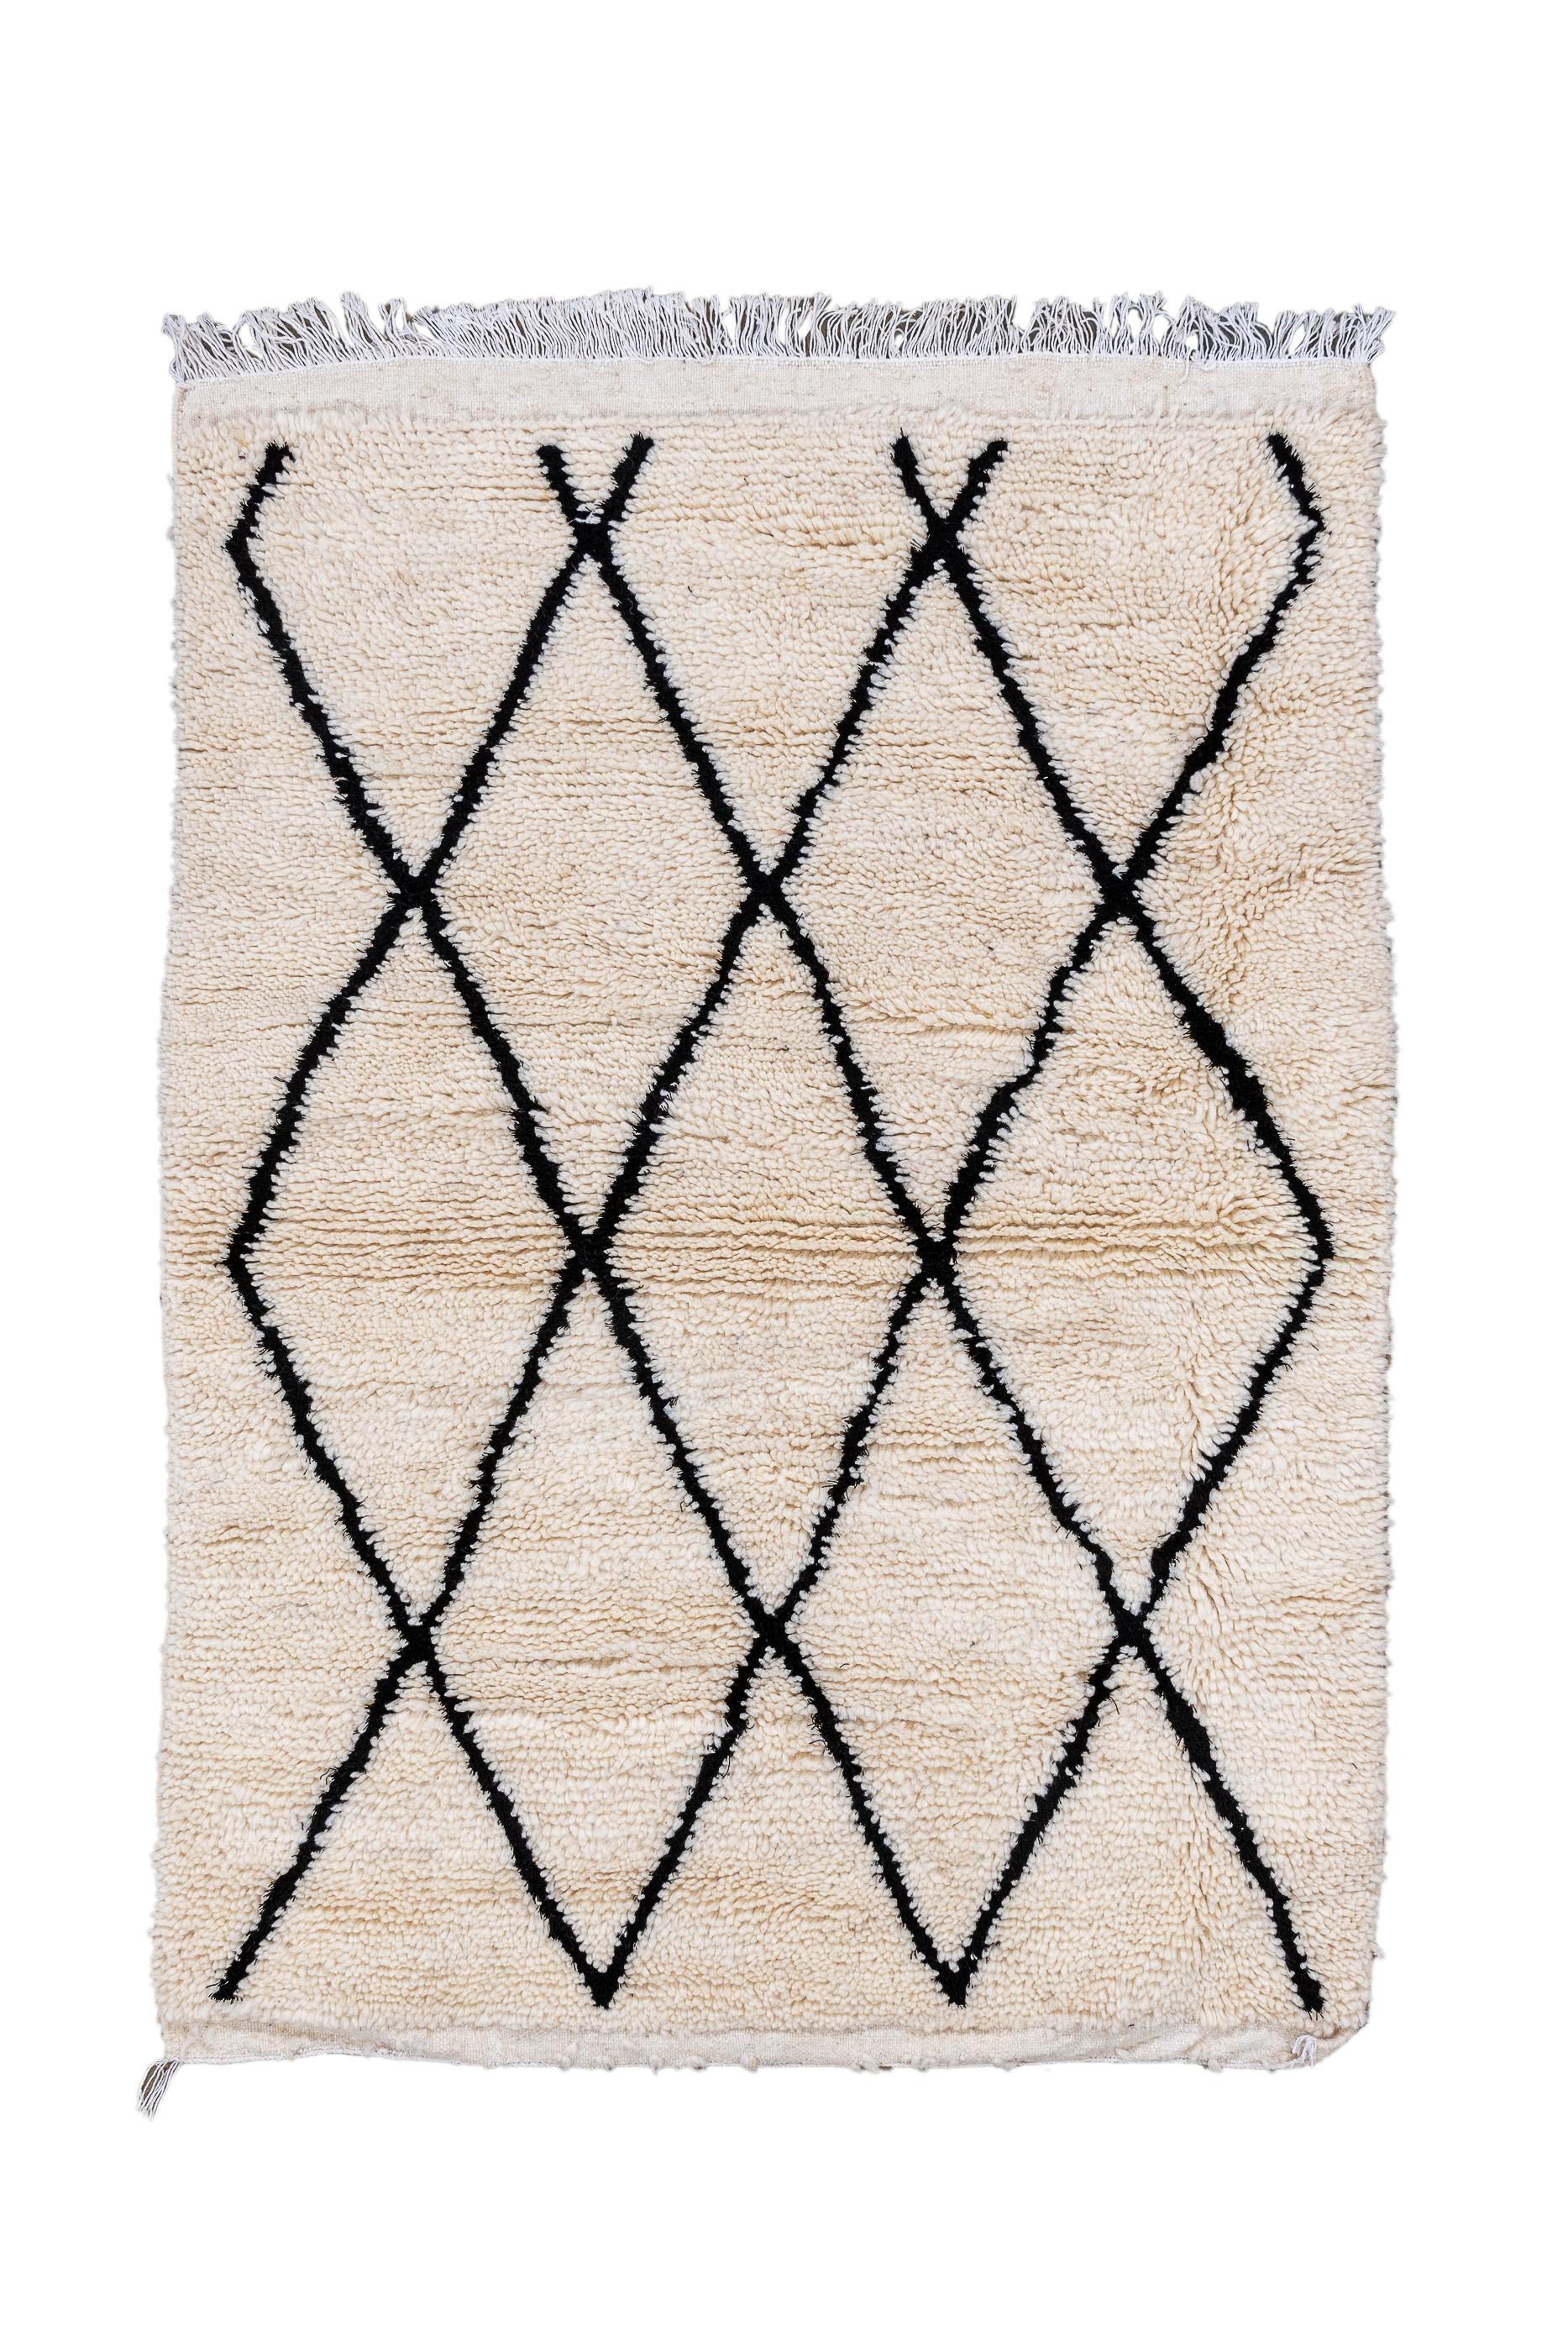 Moroccan weavers love lozenges. This rug has a bolder design emphasizing thick charcoal diagonal lines and lacking side borders. The open lozenge lattice is not quite balanced, end-to-end. Coarse weave, long pile. As new condition.Measures: 3'2x4'6